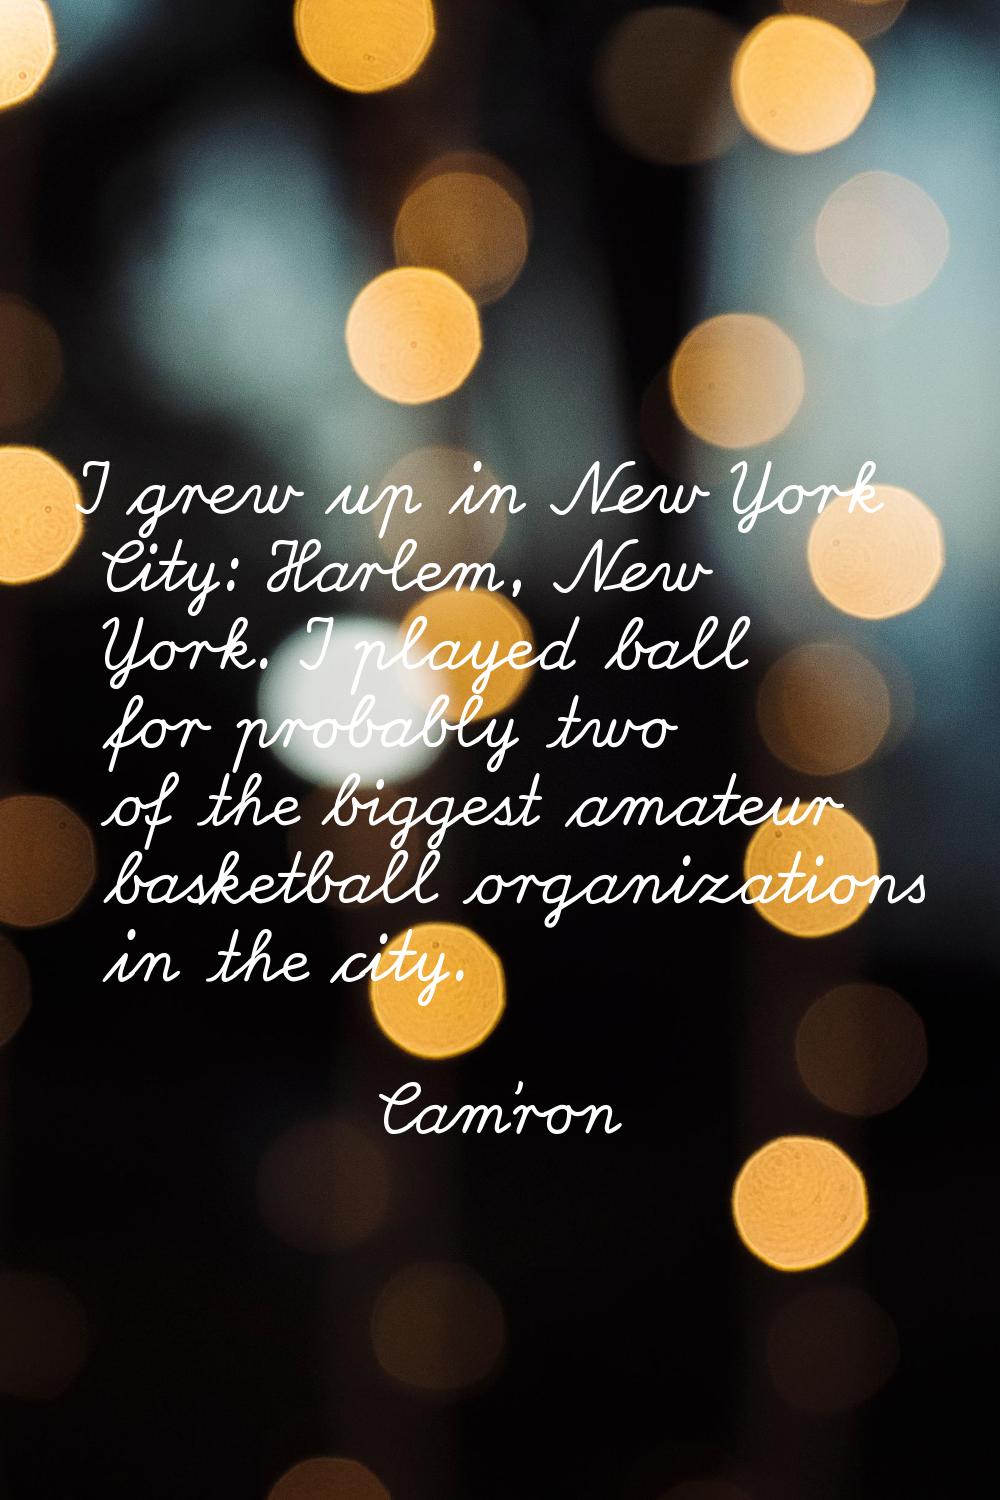 I grew up in New York City: Harlem, New York. I played ball for probably two of the biggest amateur